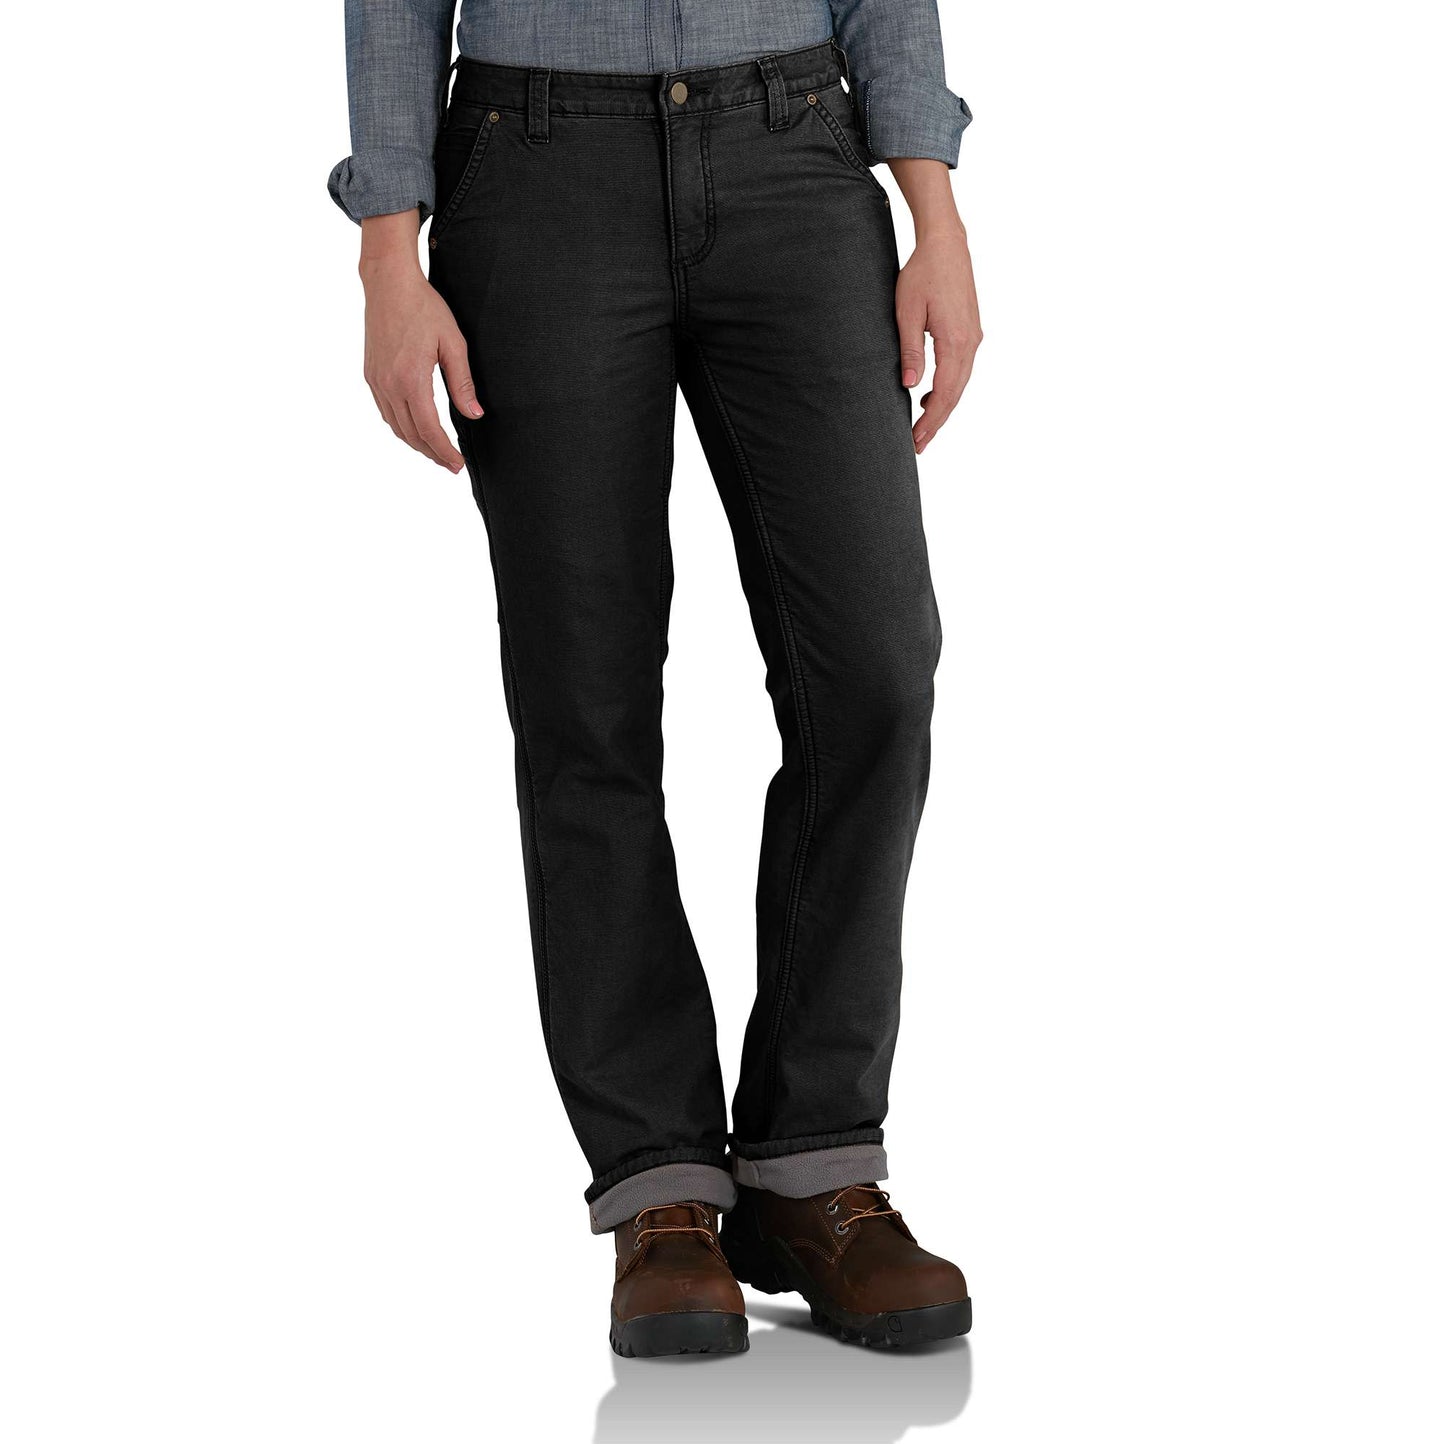 Carhartt Slim-Fit Crawford Double-Front Pants for Ladies